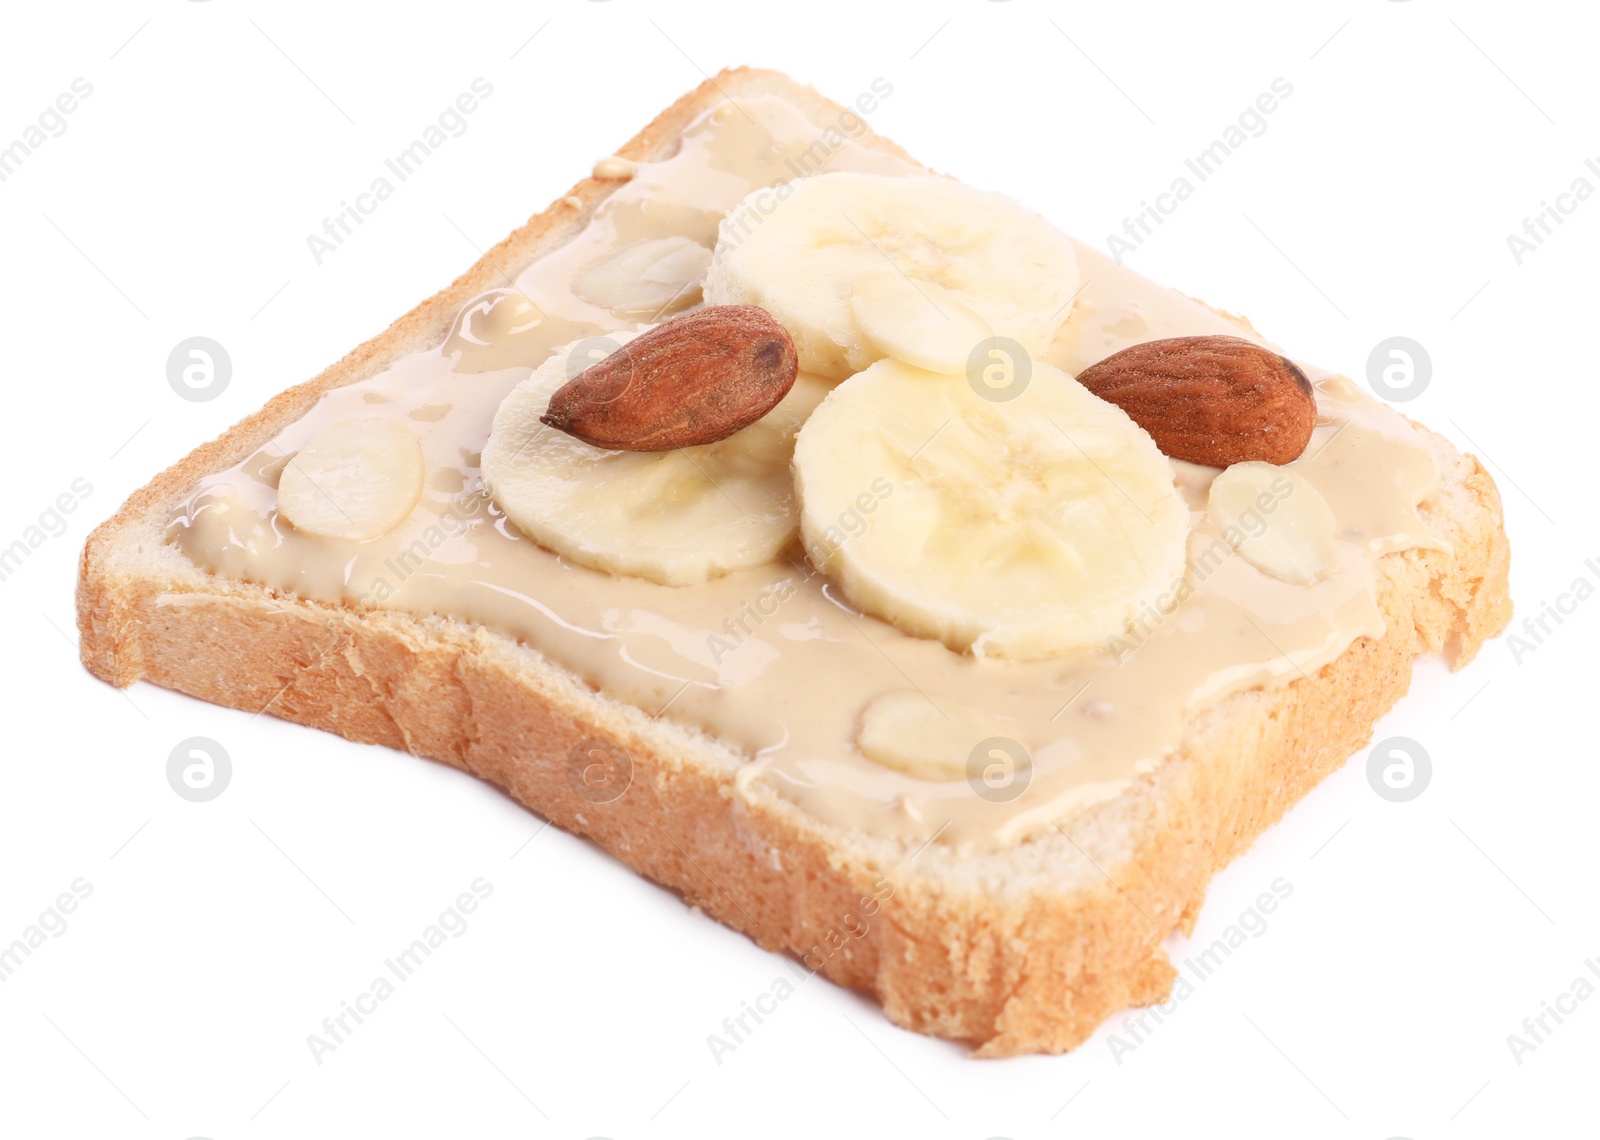 Photo of Toast with tasty nut butter, banana slices and almonds isolated on white